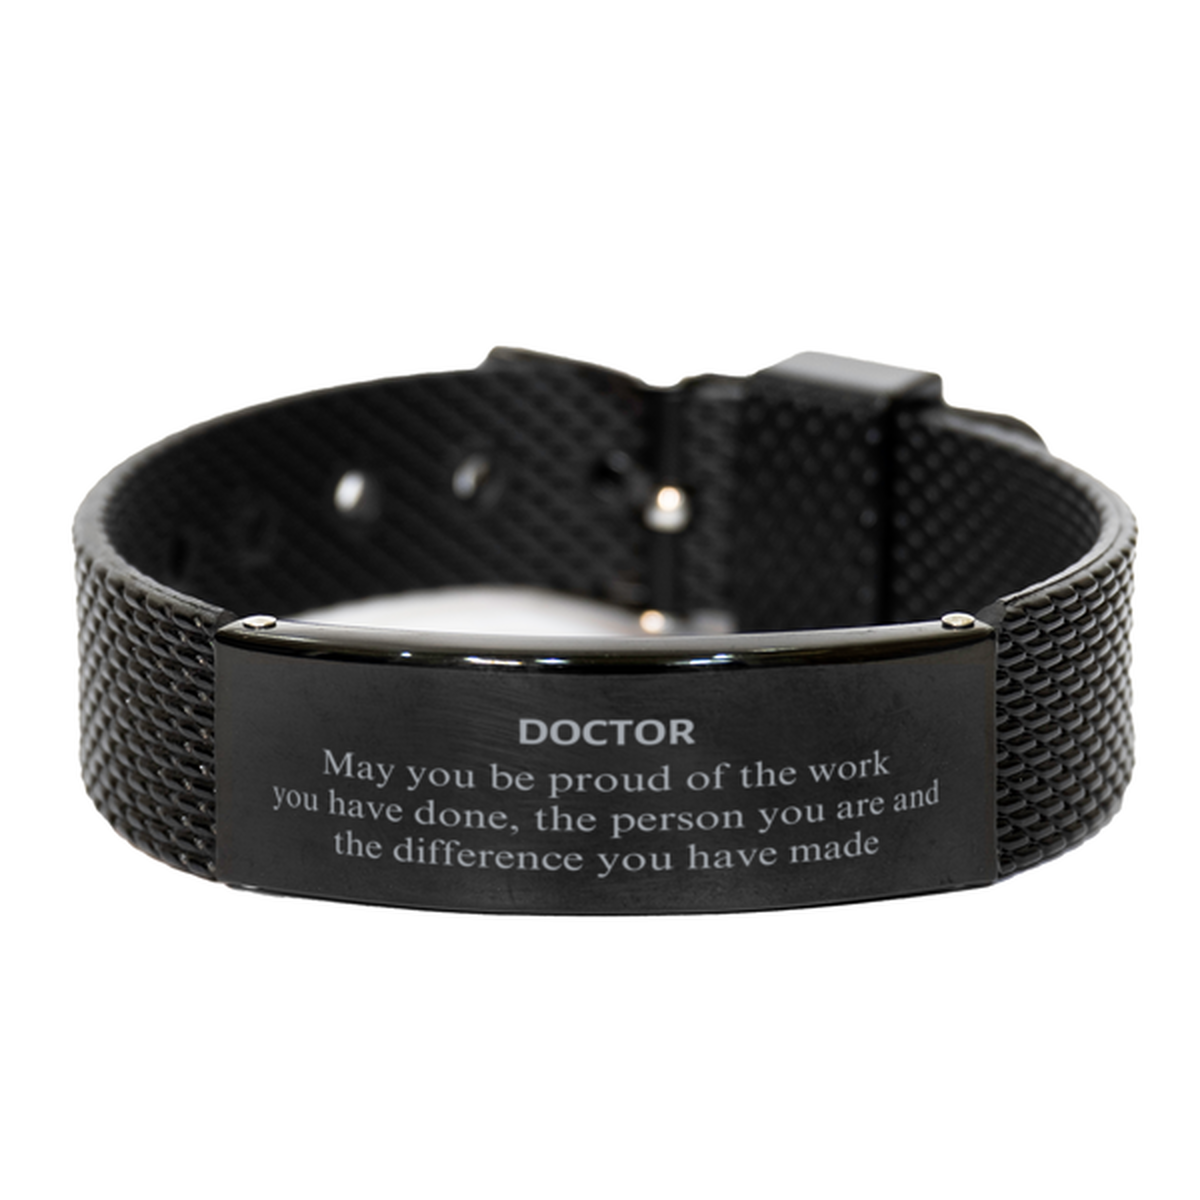 Doctor May you be proud of the work you have done, Retirement Doctor Black Shark Mesh Bracelet for Colleague Appreciation Gifts Amazing for Doctor